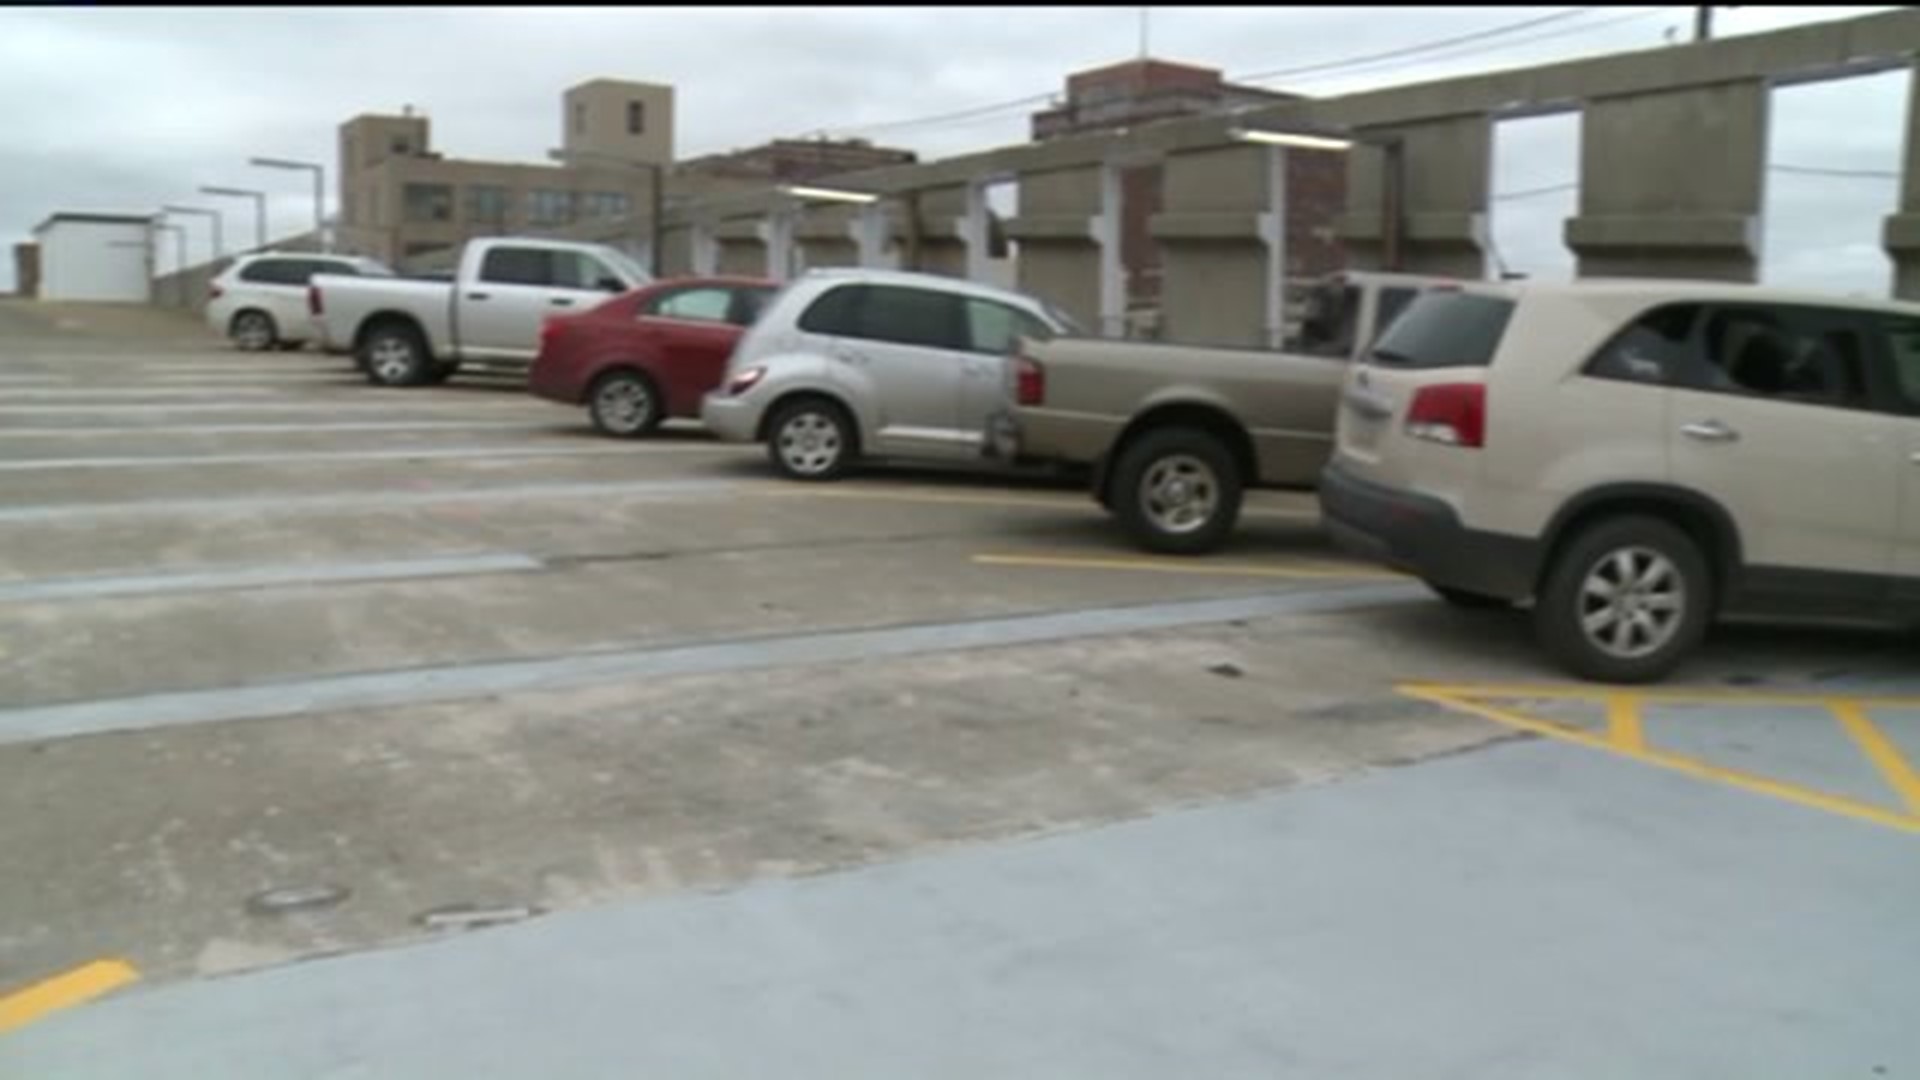 Parking in Peace After Renovations to Hazleton Garage